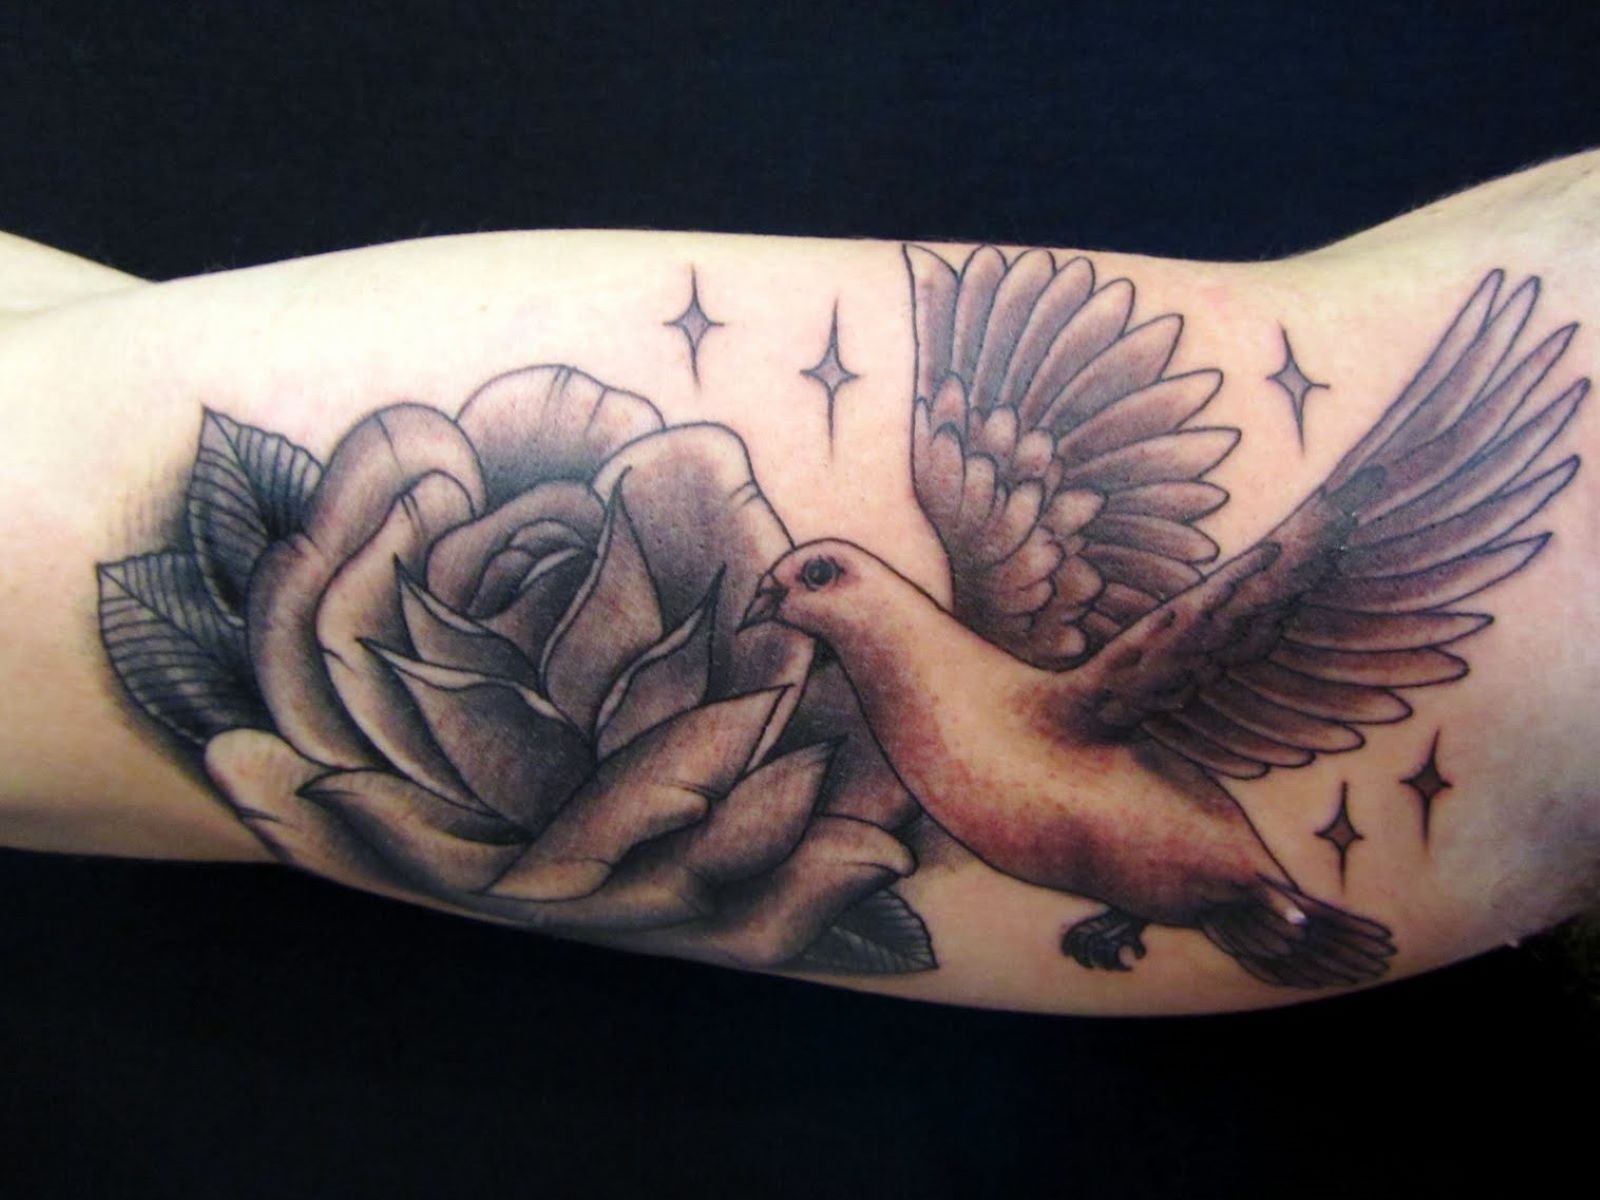 The Ultimate Symbol Of Love: The Dove Tattoo